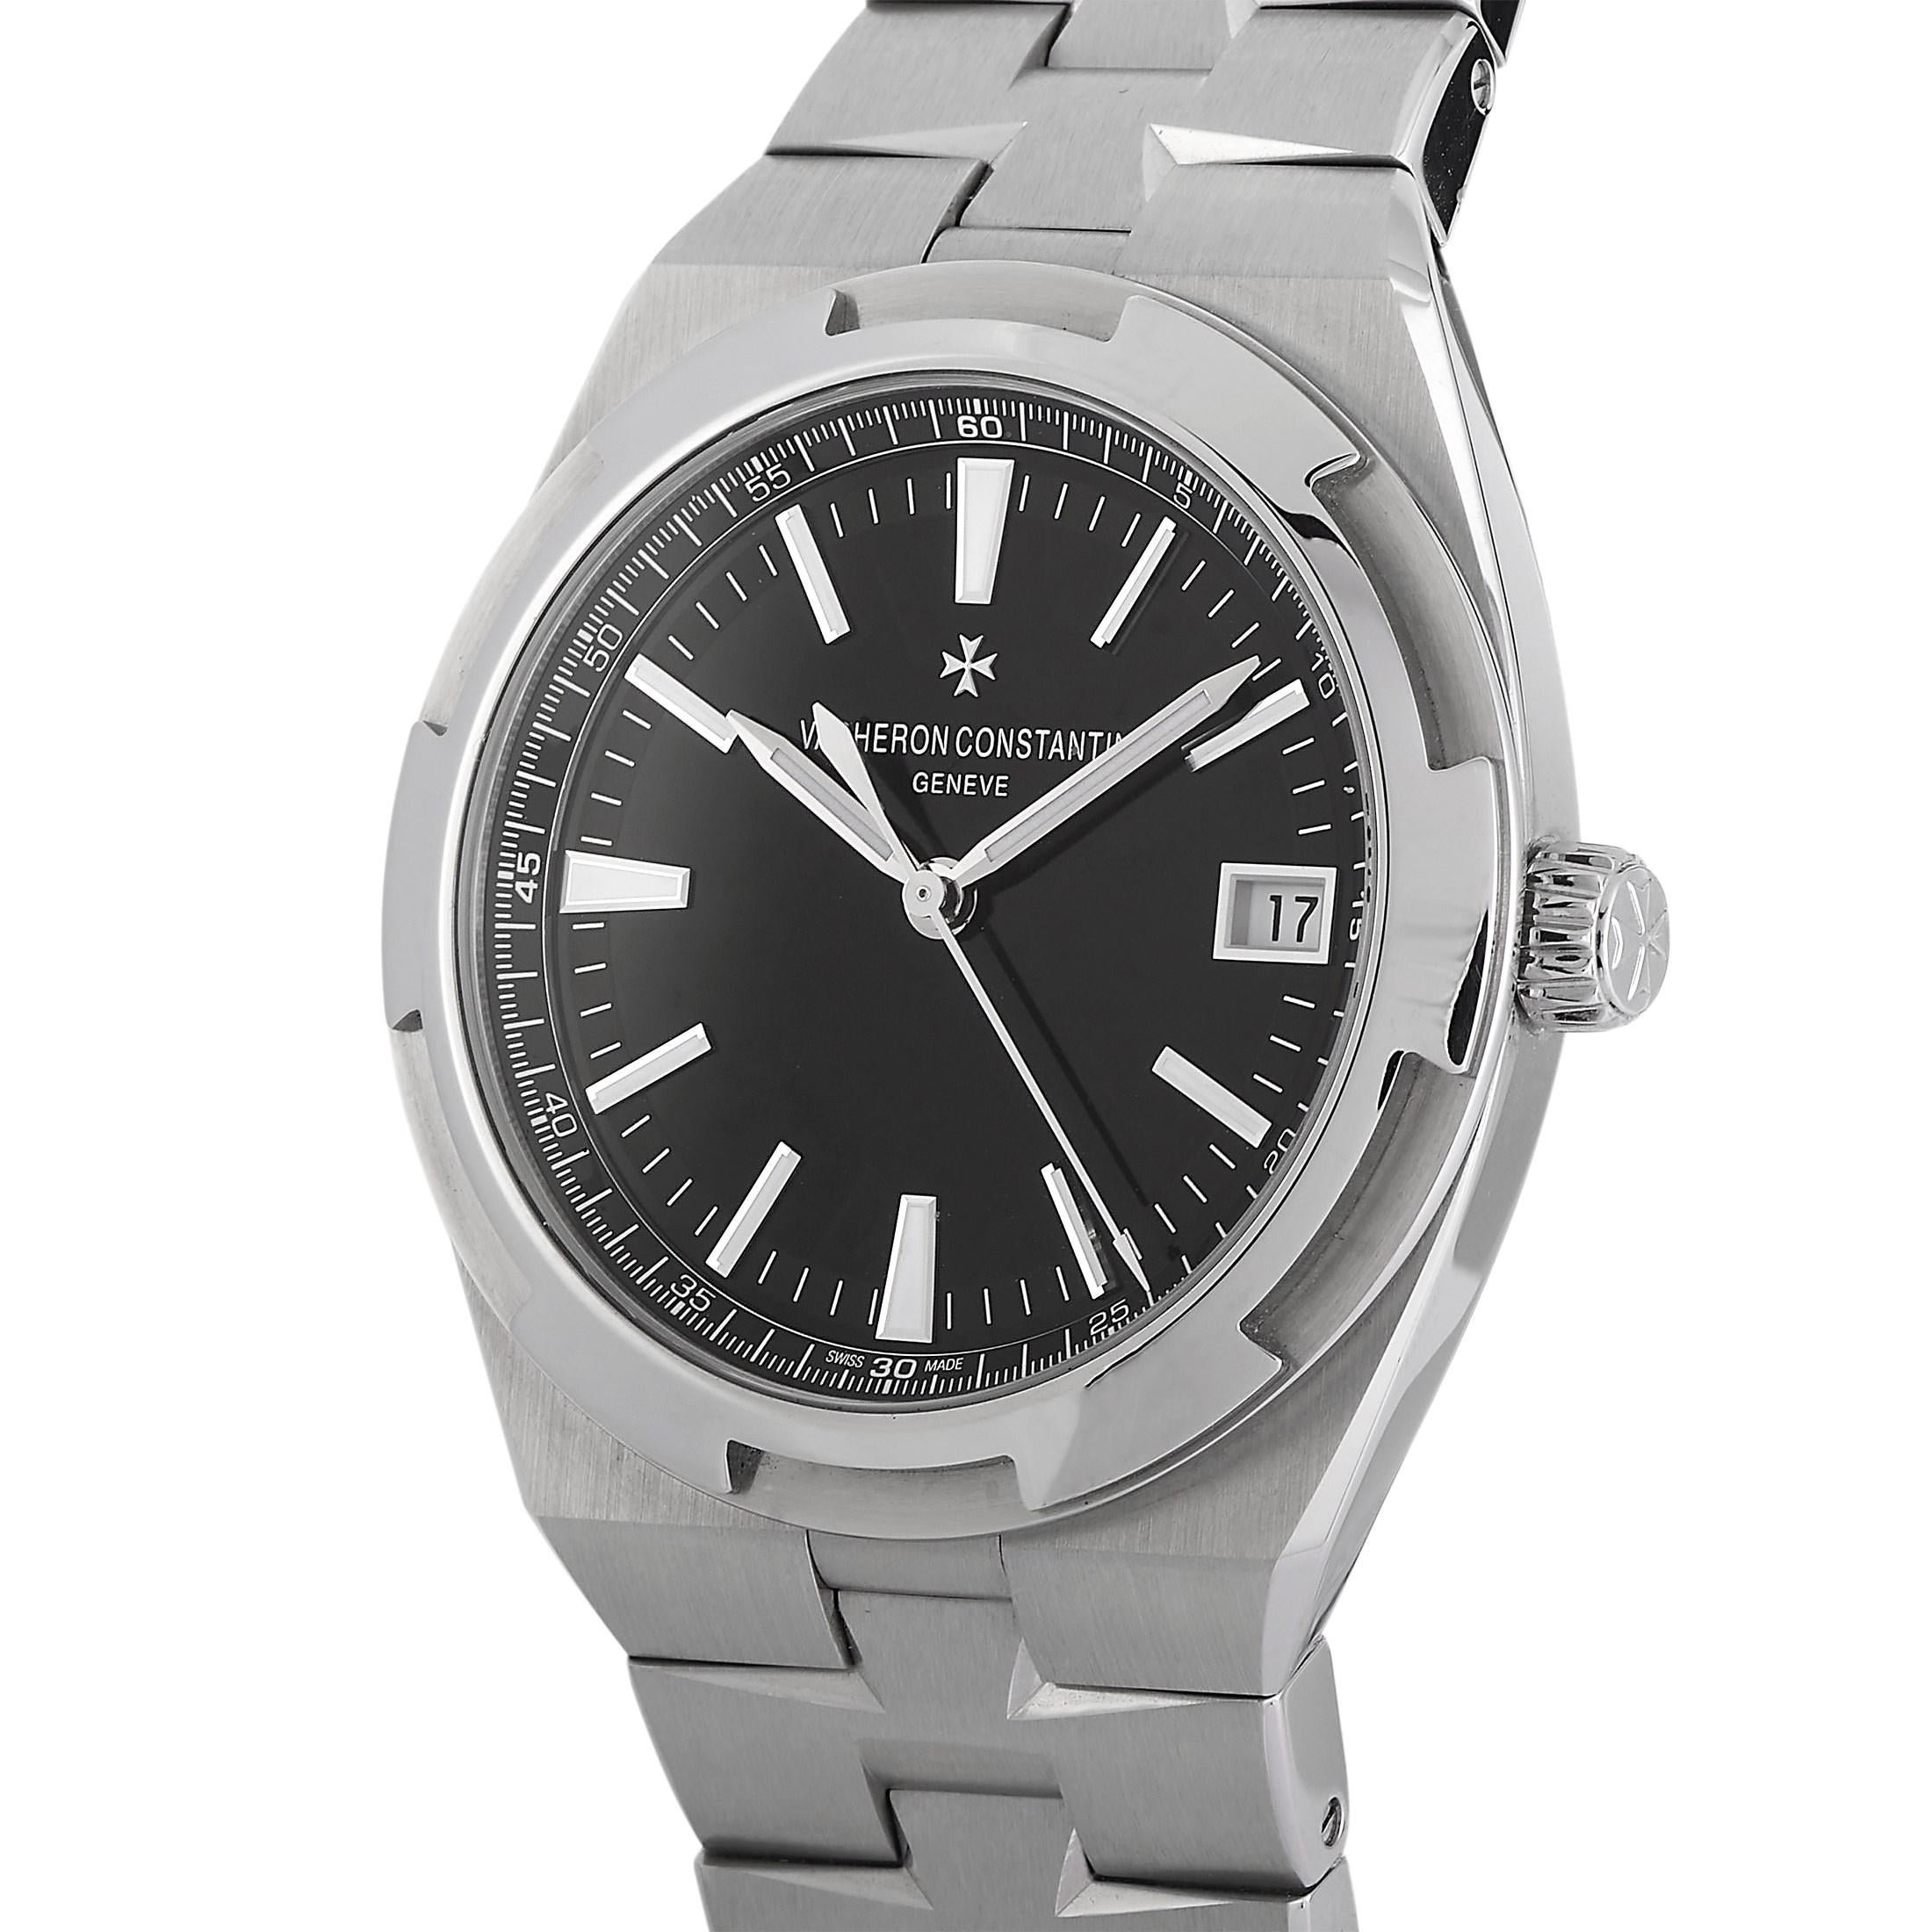 The Vacheron Constantin Overseas Watch, reference number 4500V/110A-B483, possesses an inherent sense of refinement. 

This sleek, simple timepiece features a 41mm Stainless Steel case accented by a fixed Stainless Steel bezel. On the black dial,